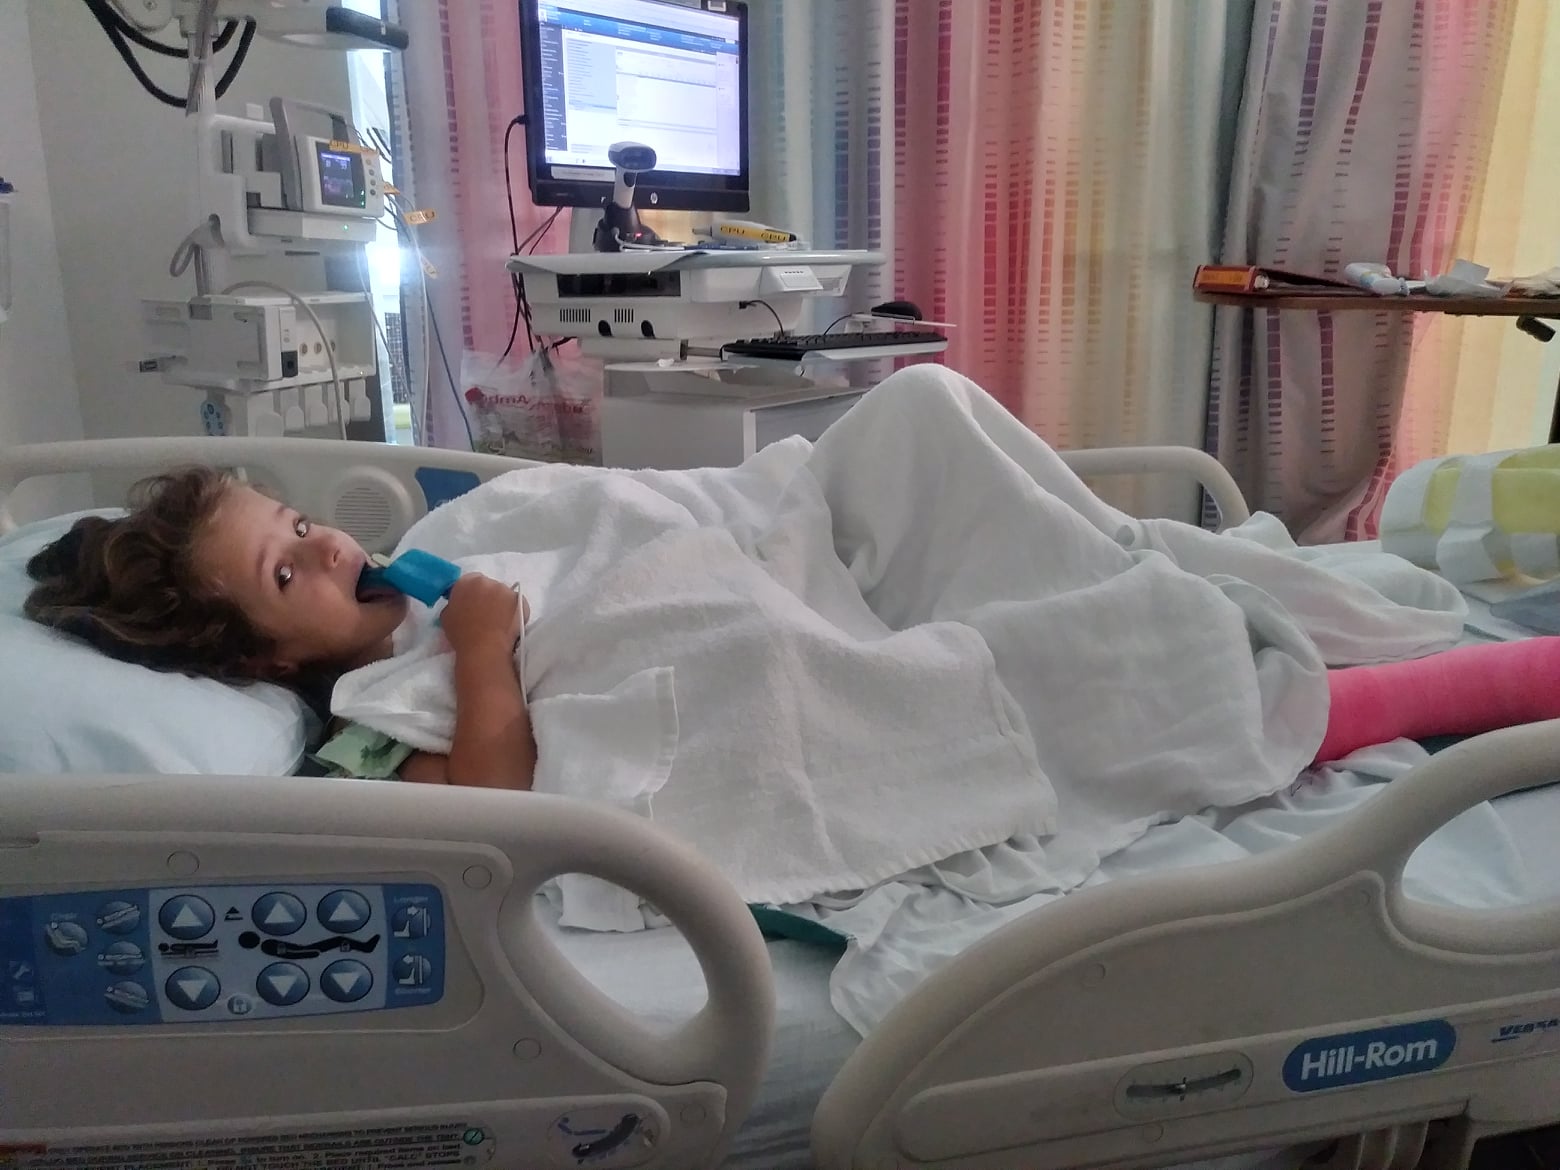 Image a child in a hospital bed eating ice cream